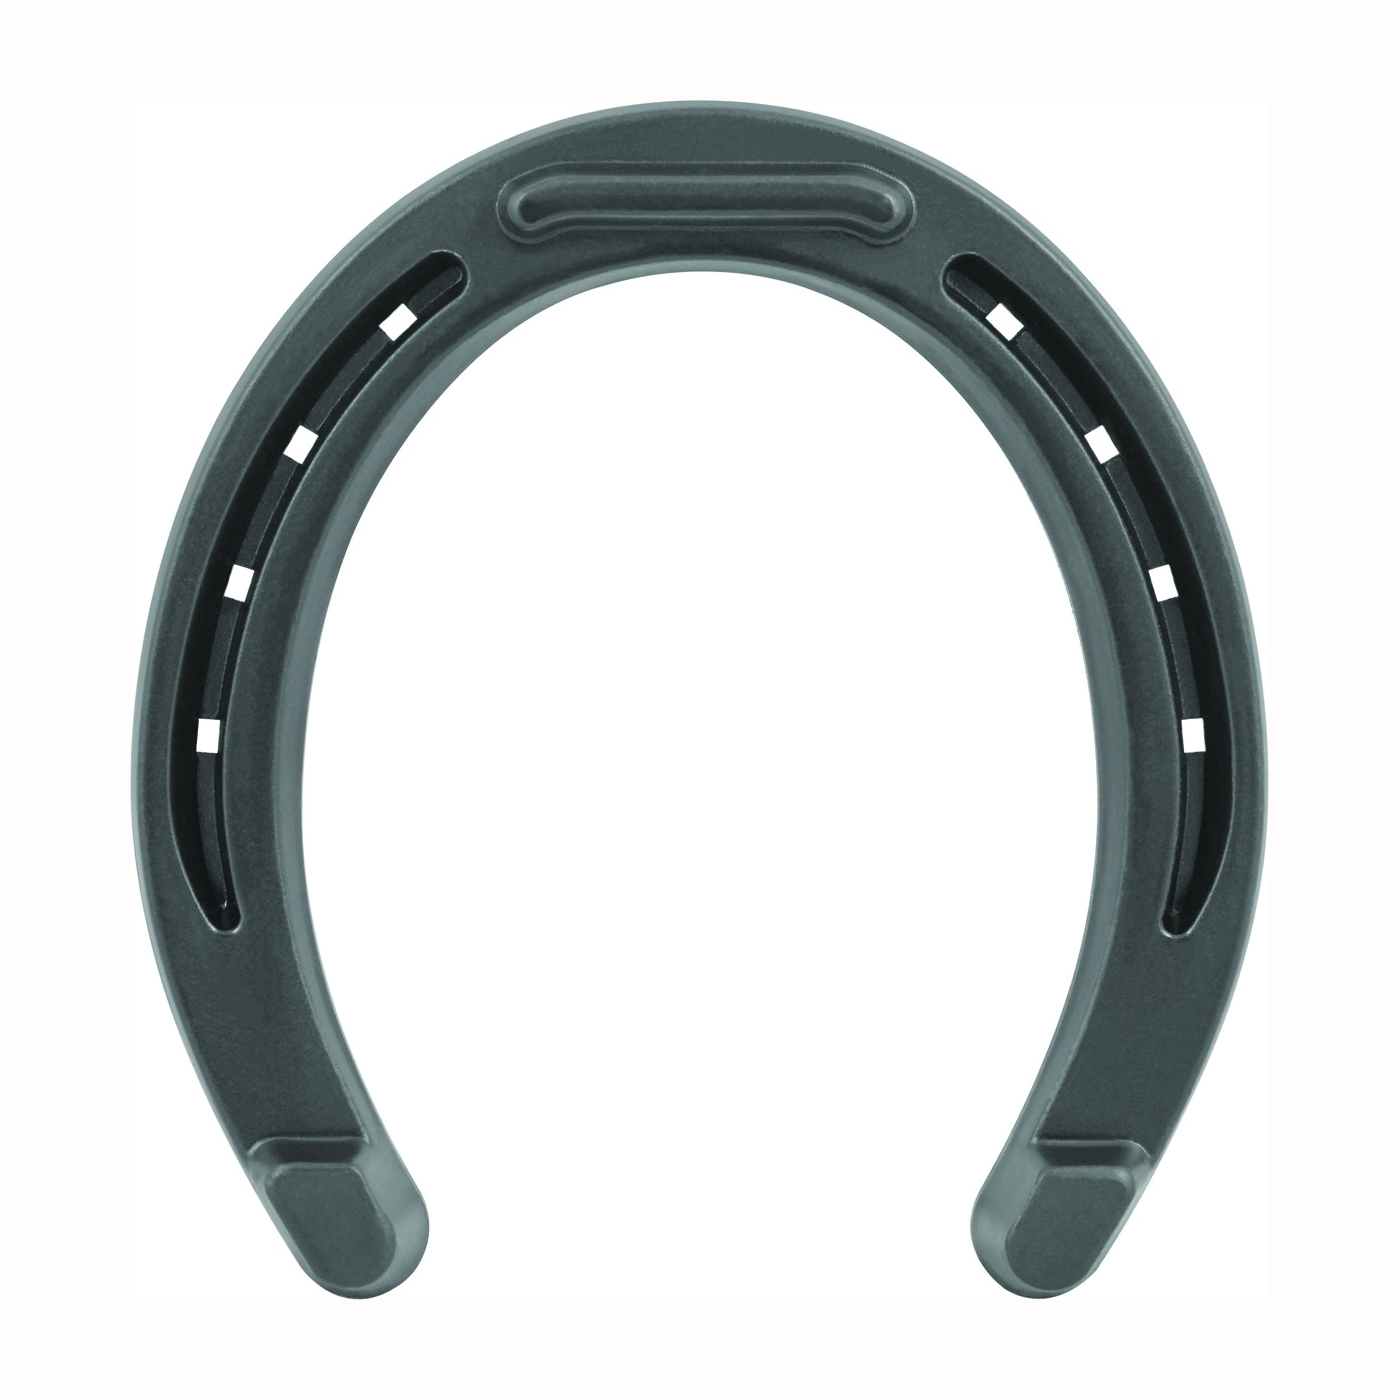 Farrier 00THB Horseshoe, 5/16 in Thick, #00, Steel